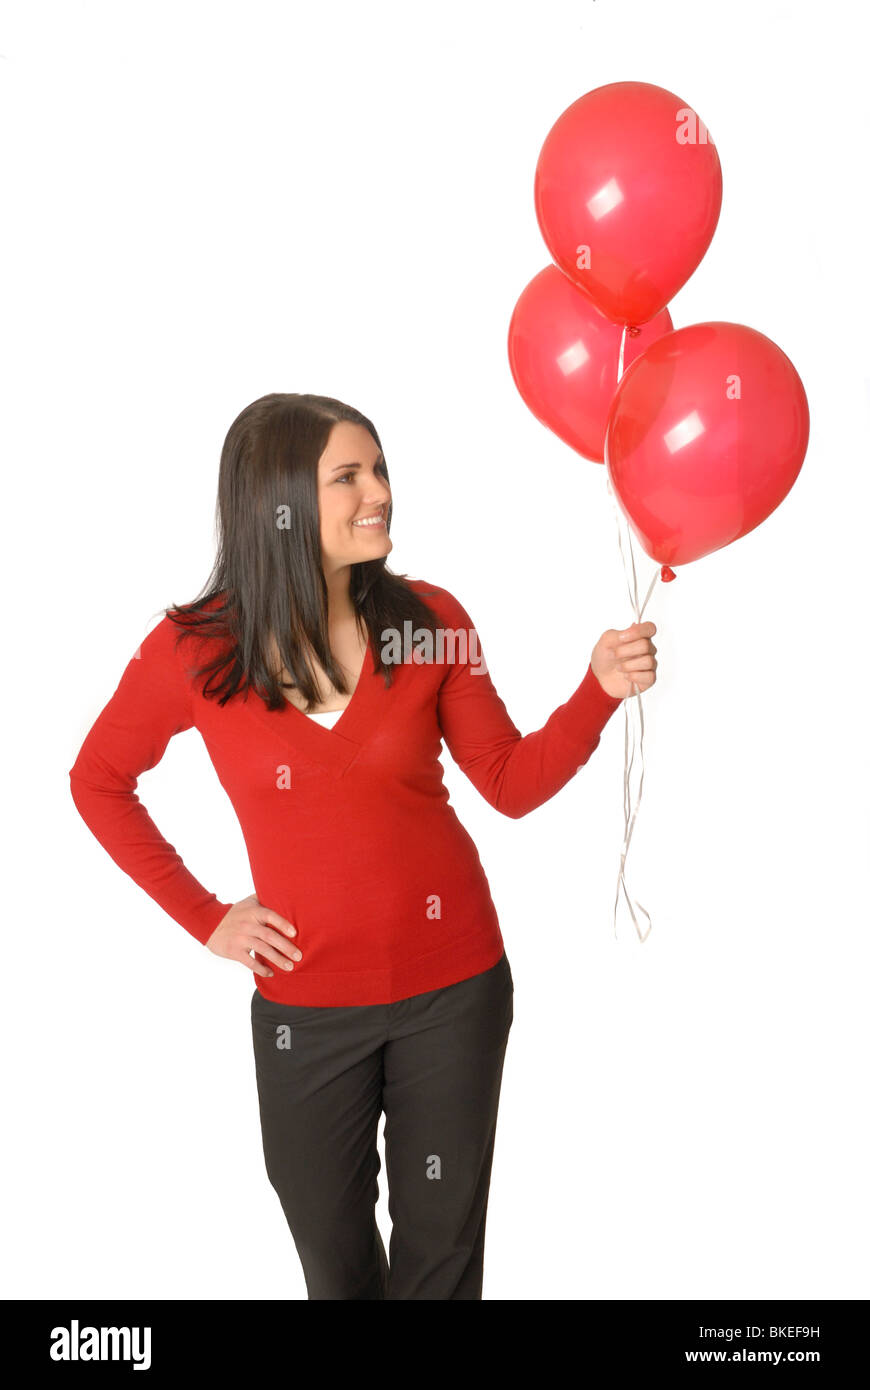 Attractive woman with red balloons. Stock Photo